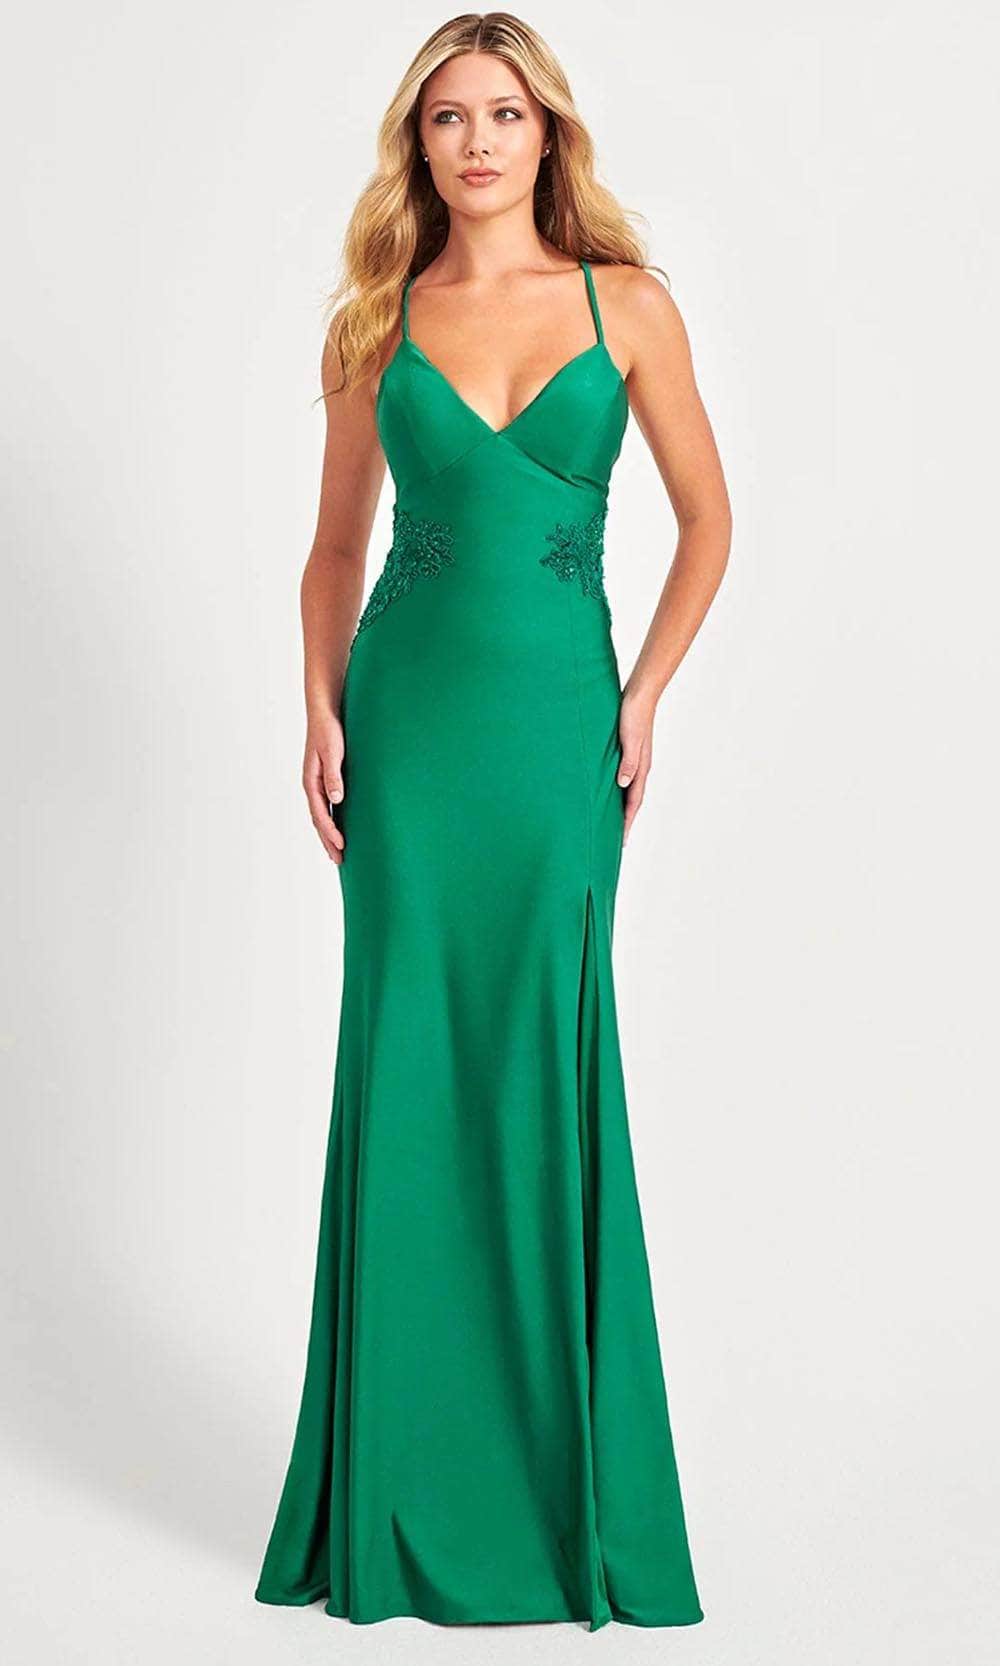 Image of Faviana 11020 - Applique Back Mermaid Prom Gown